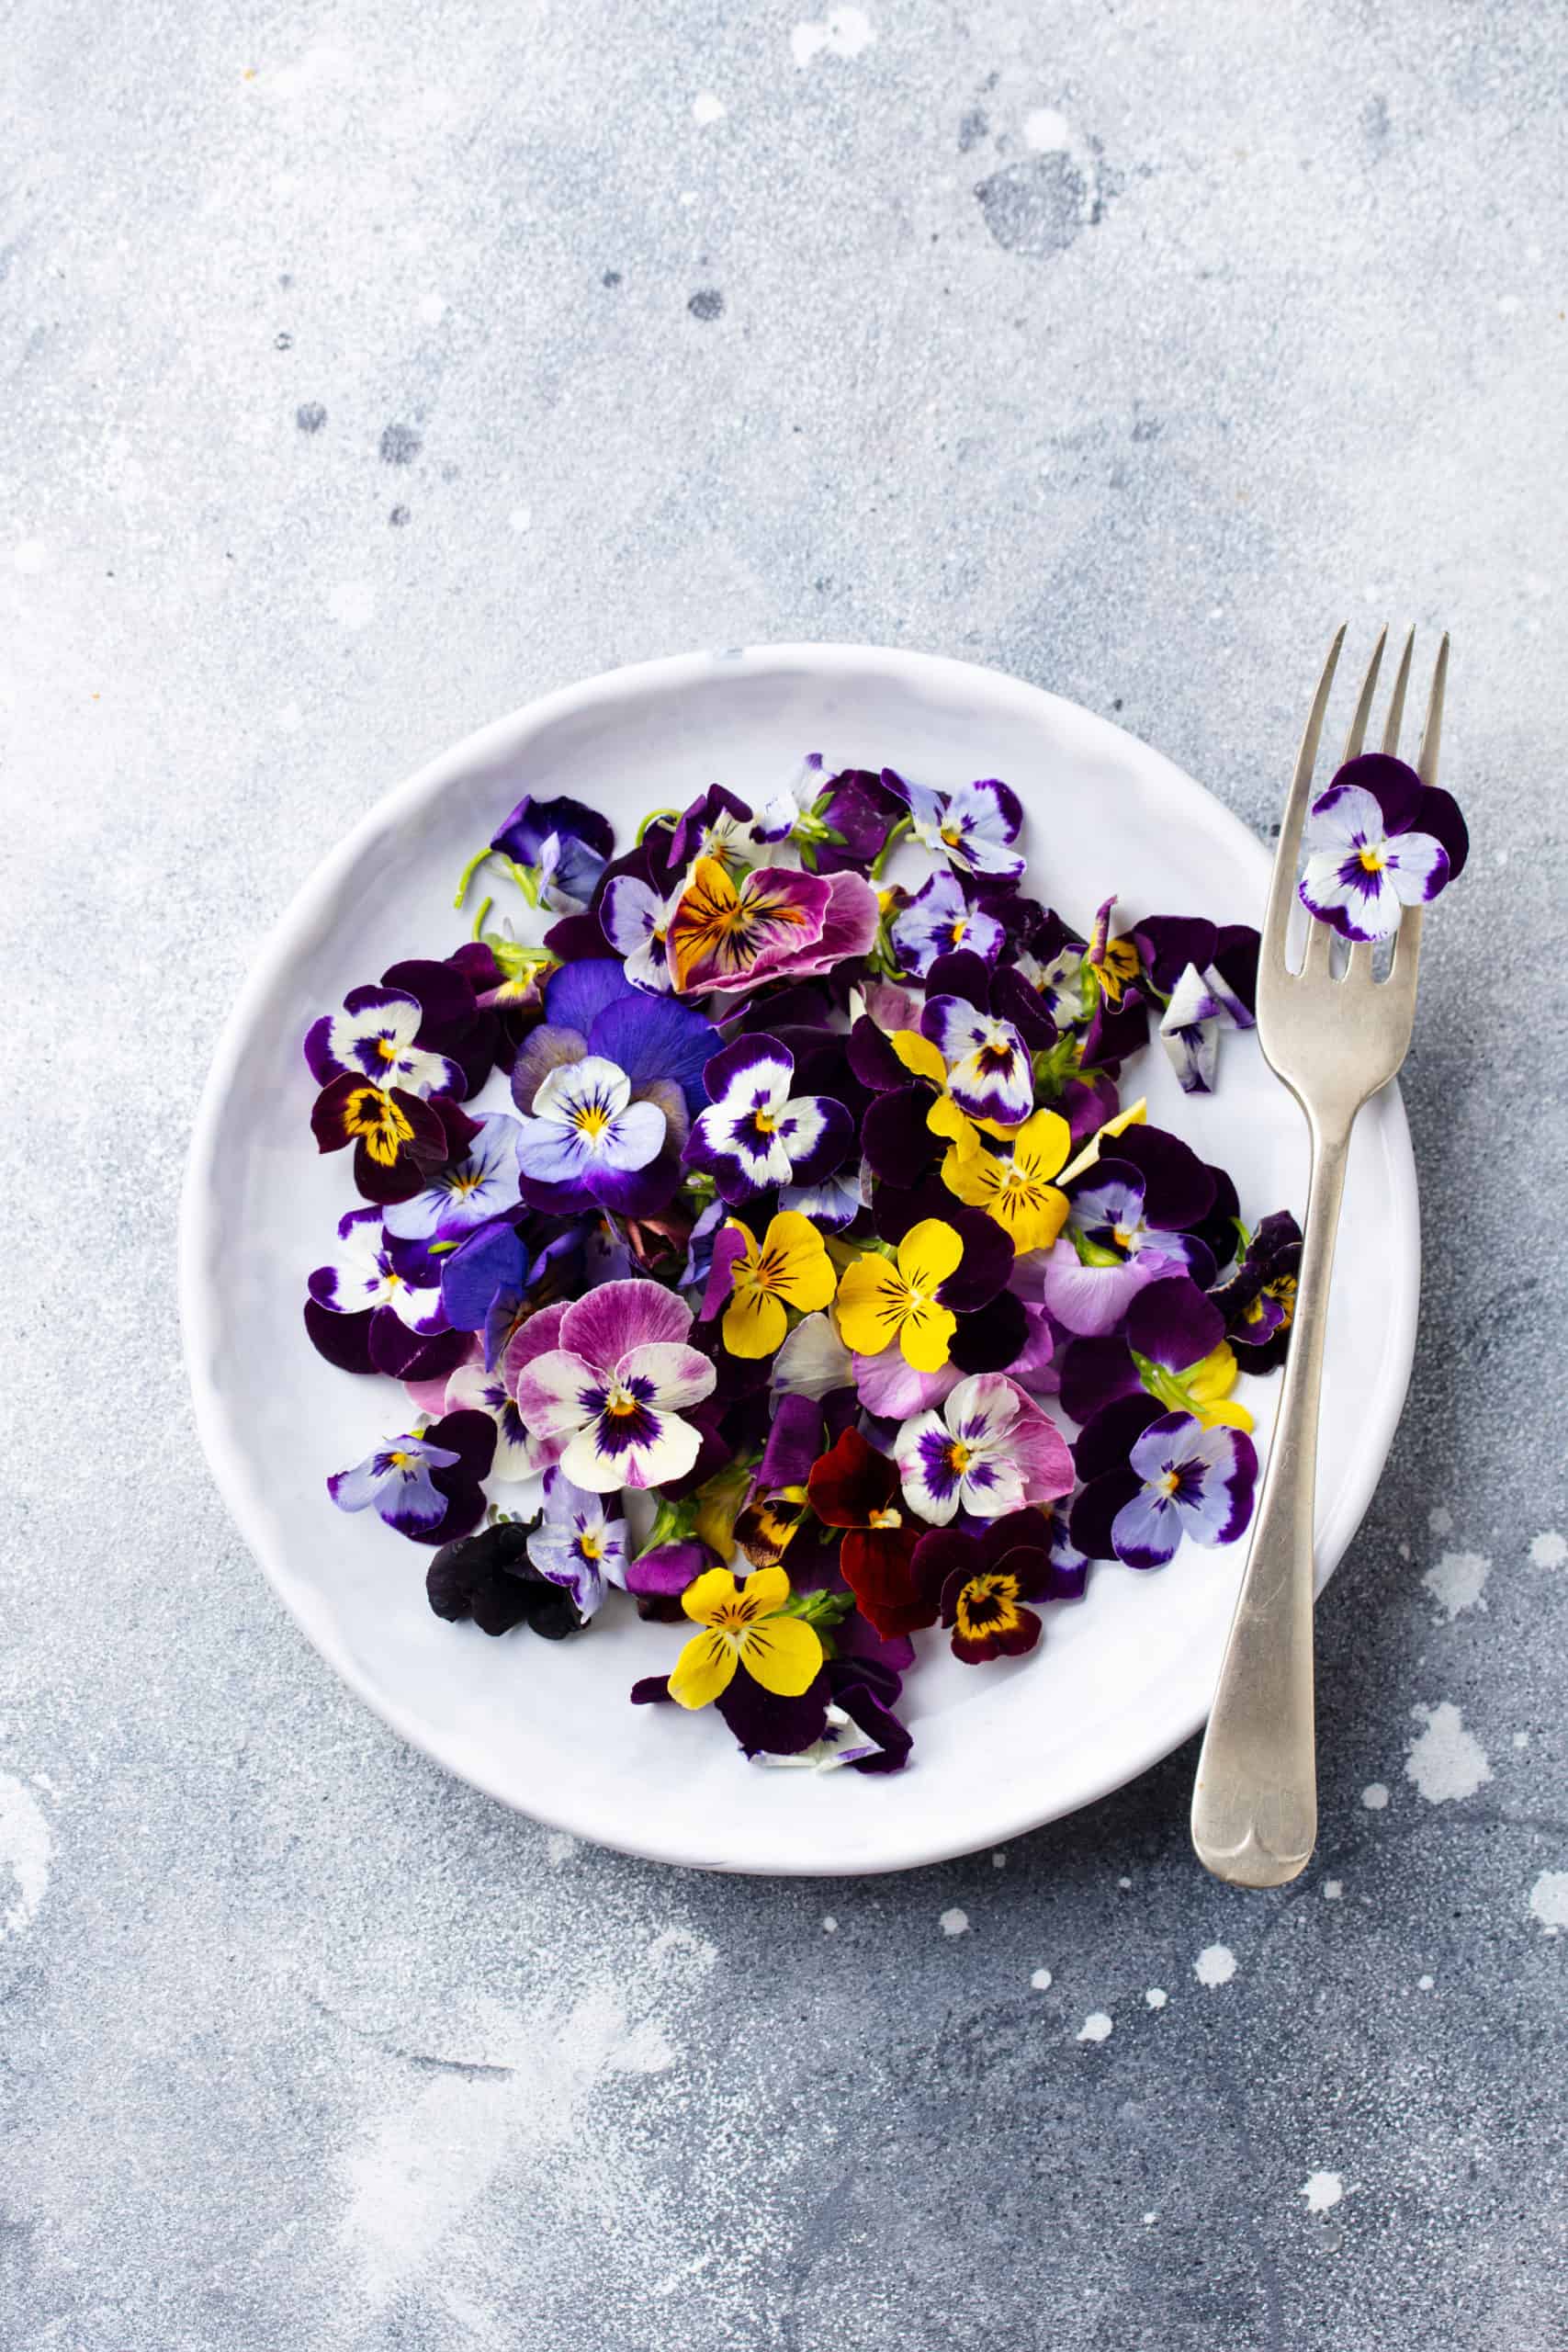 Edible flowers, field pansies, violets on white plate. Grey background. Top view.